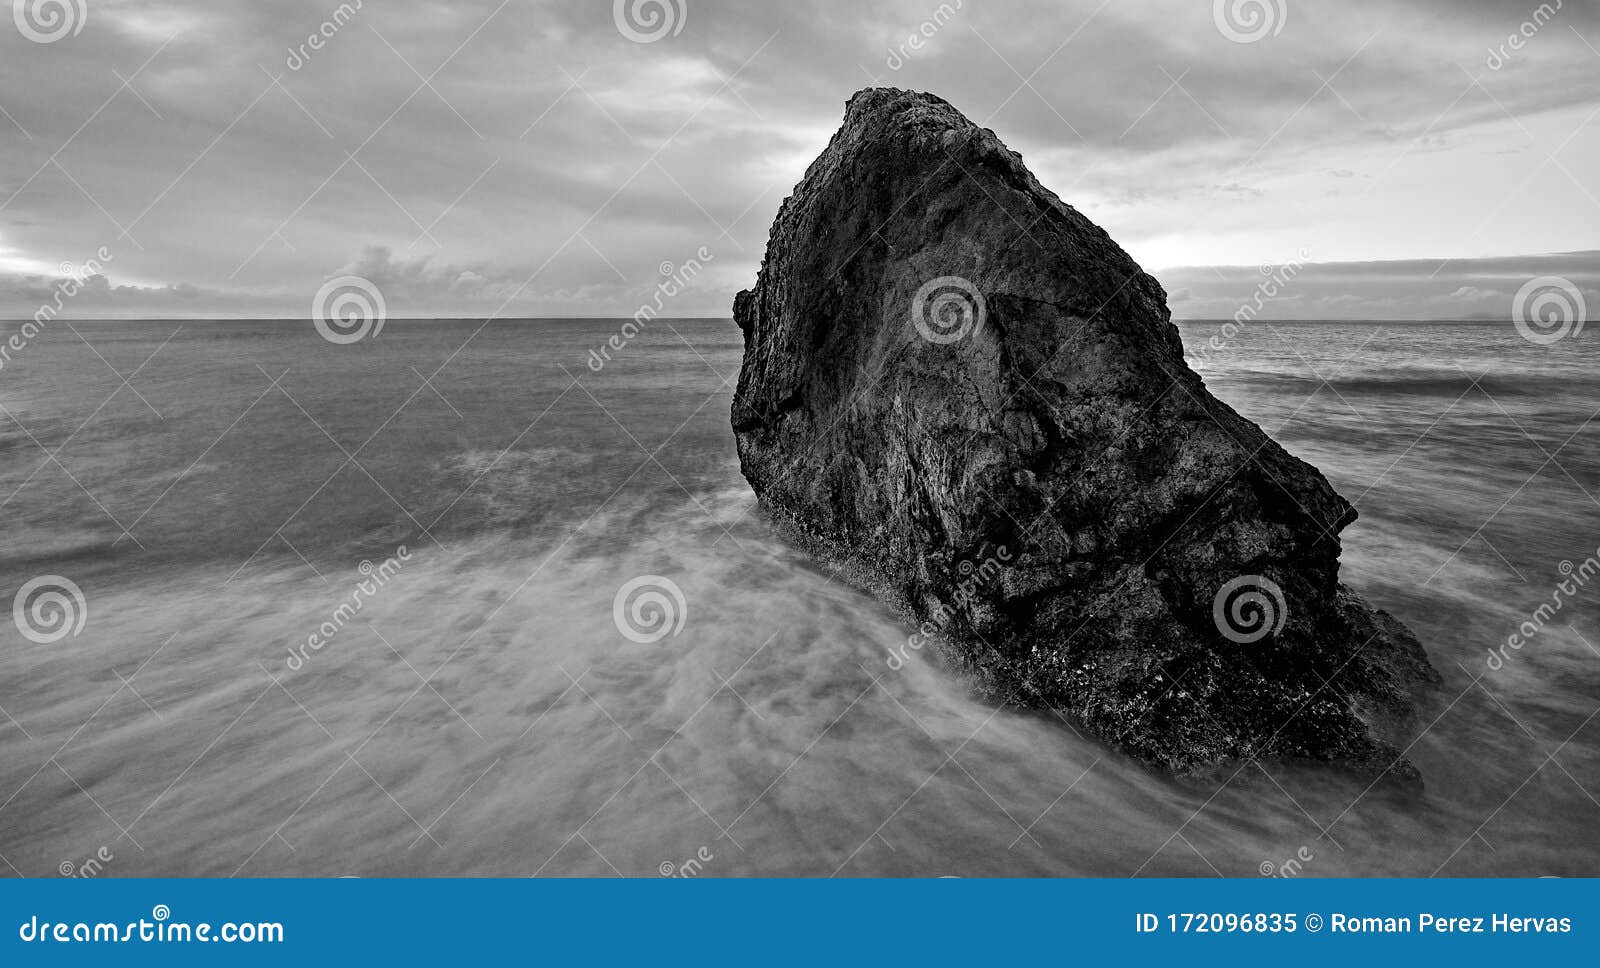 great rock in the middle of the sea